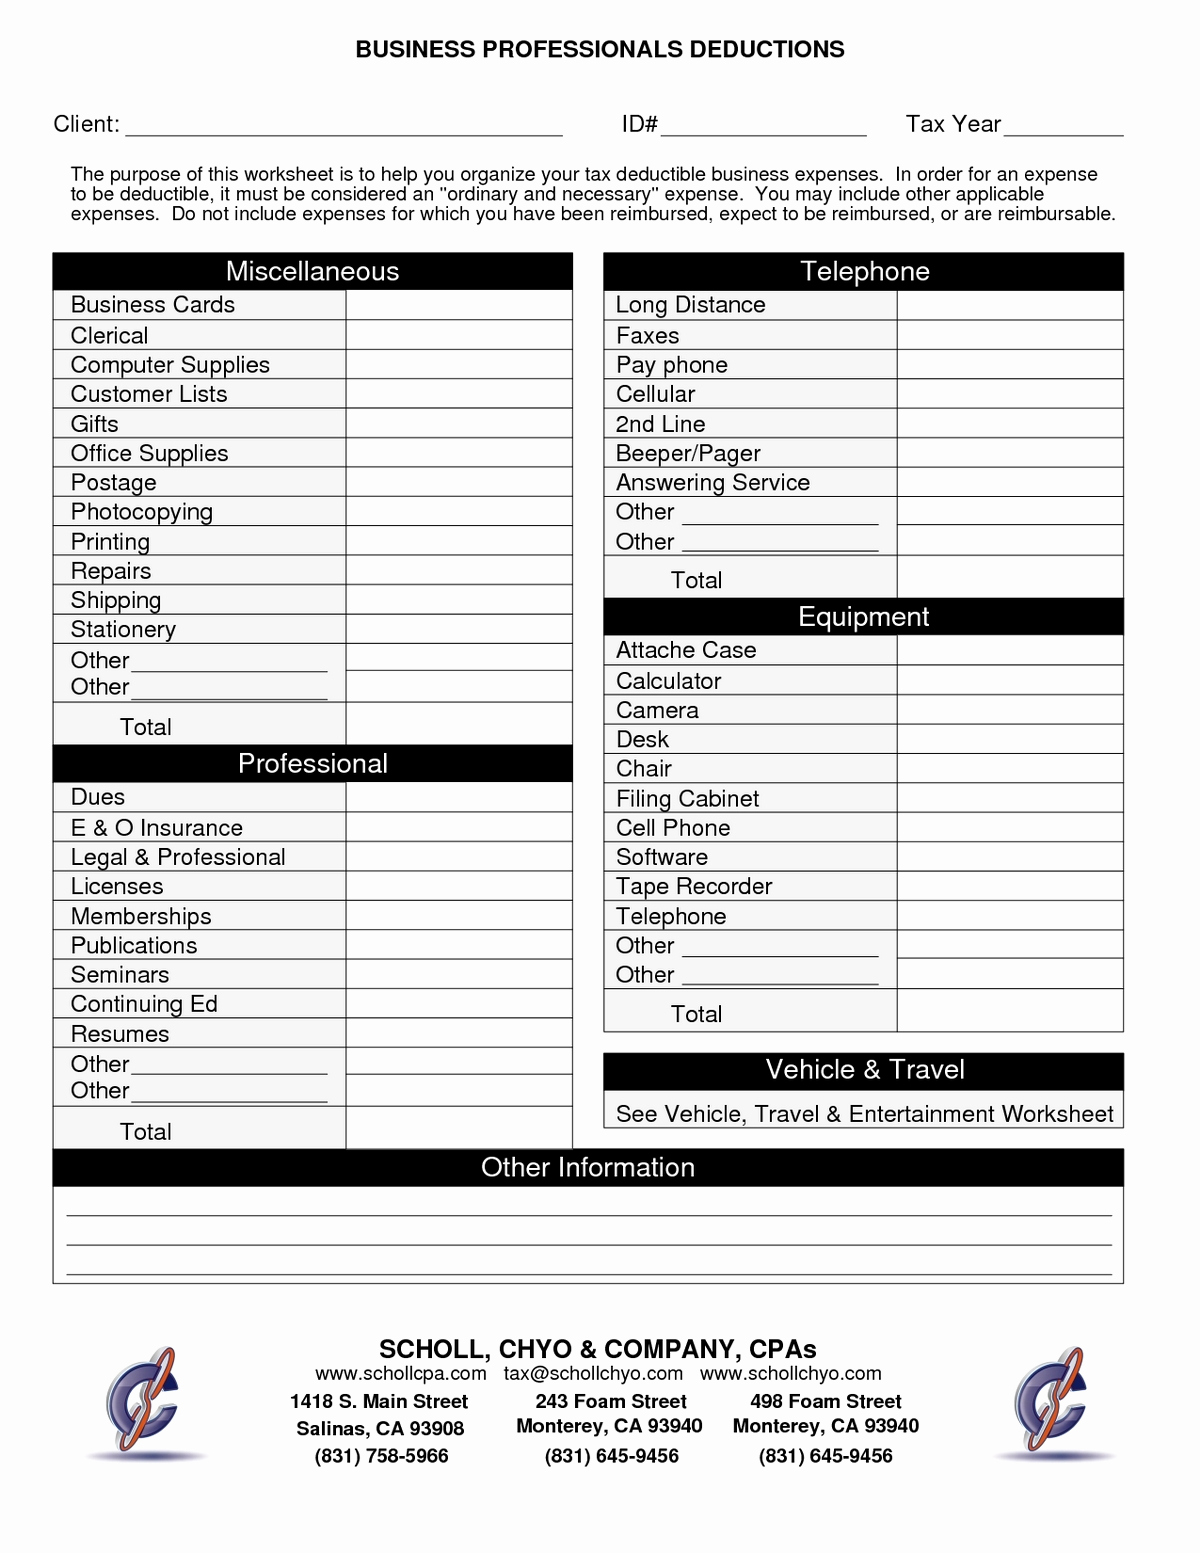 Clothing Donation Tax Deduction Worksheet Unique Small Business Tax Spreadsheet with Clothing Donations